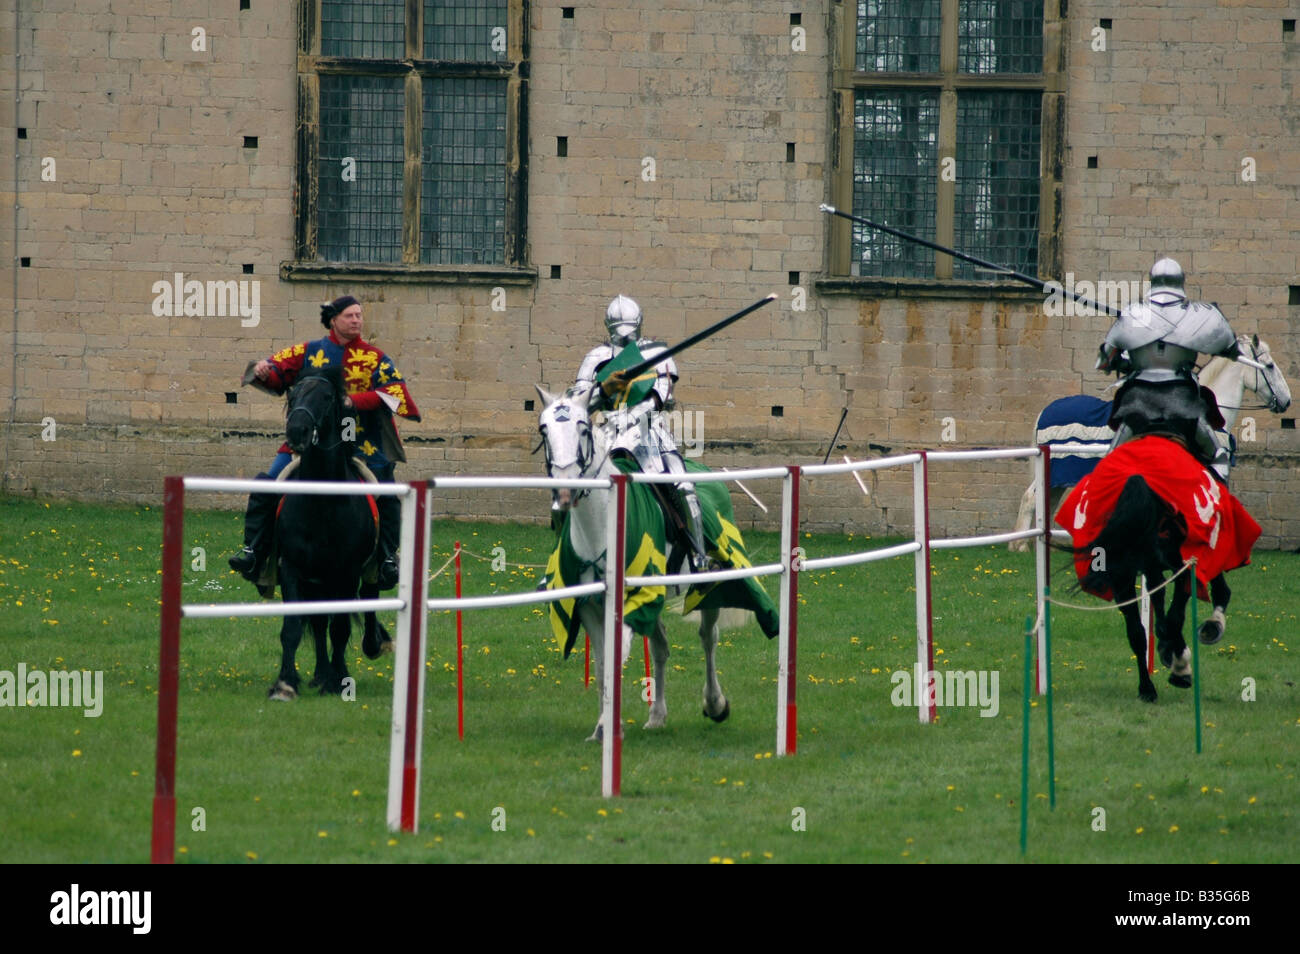 2 knights jousting Stock Photo